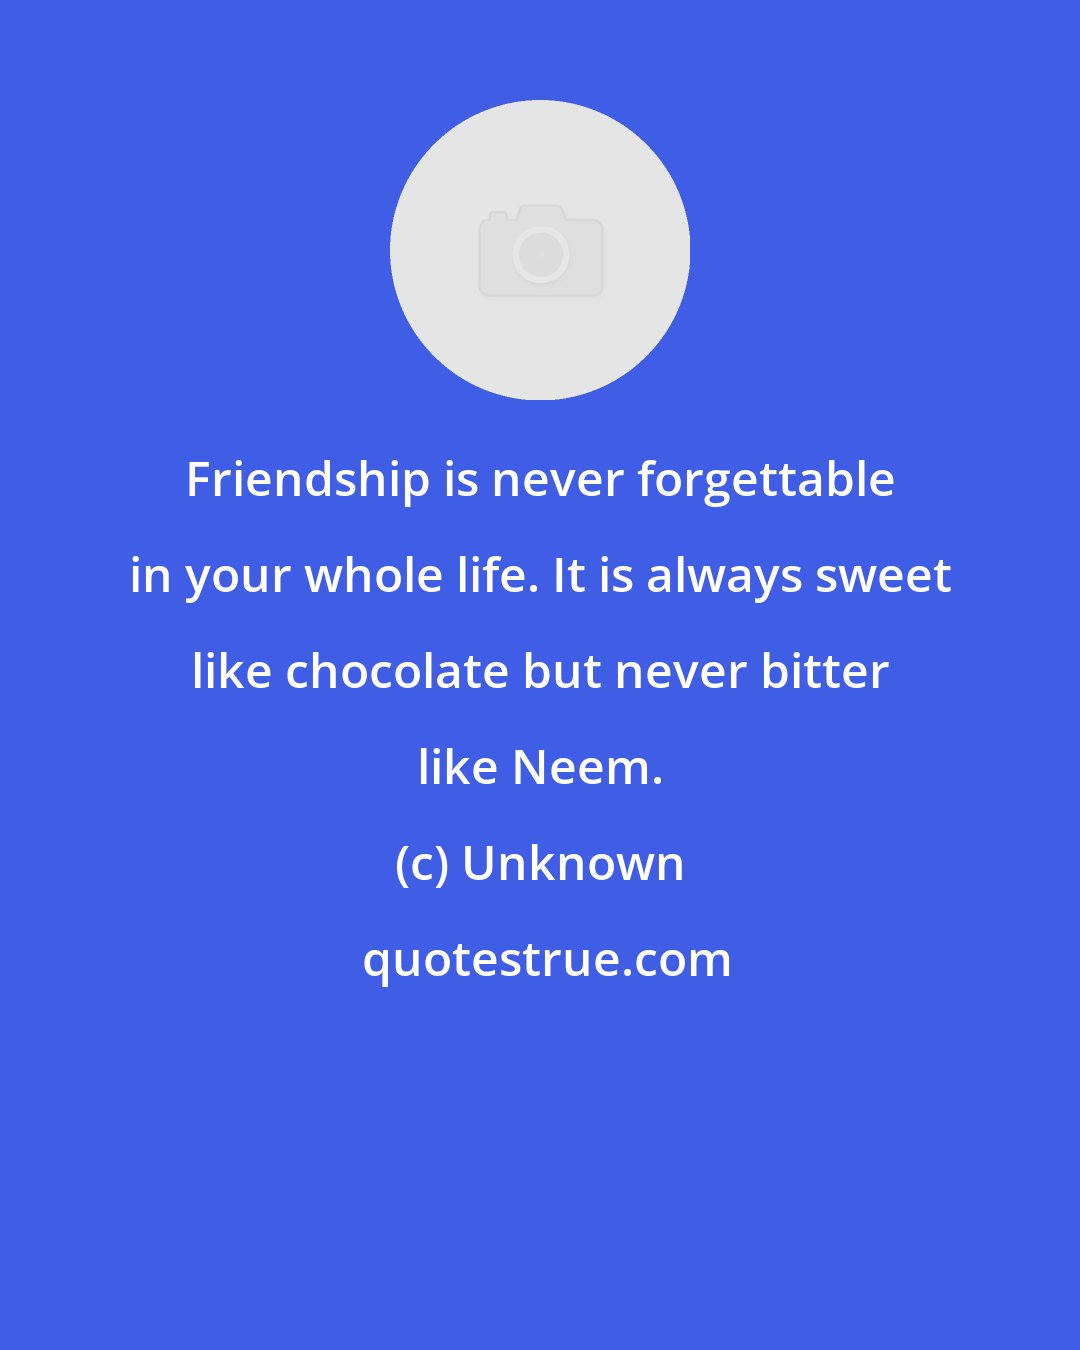 Unknown: Friendship is never forgettable in your whole life. It is always sweet like chocolate but never bitter like Neem.